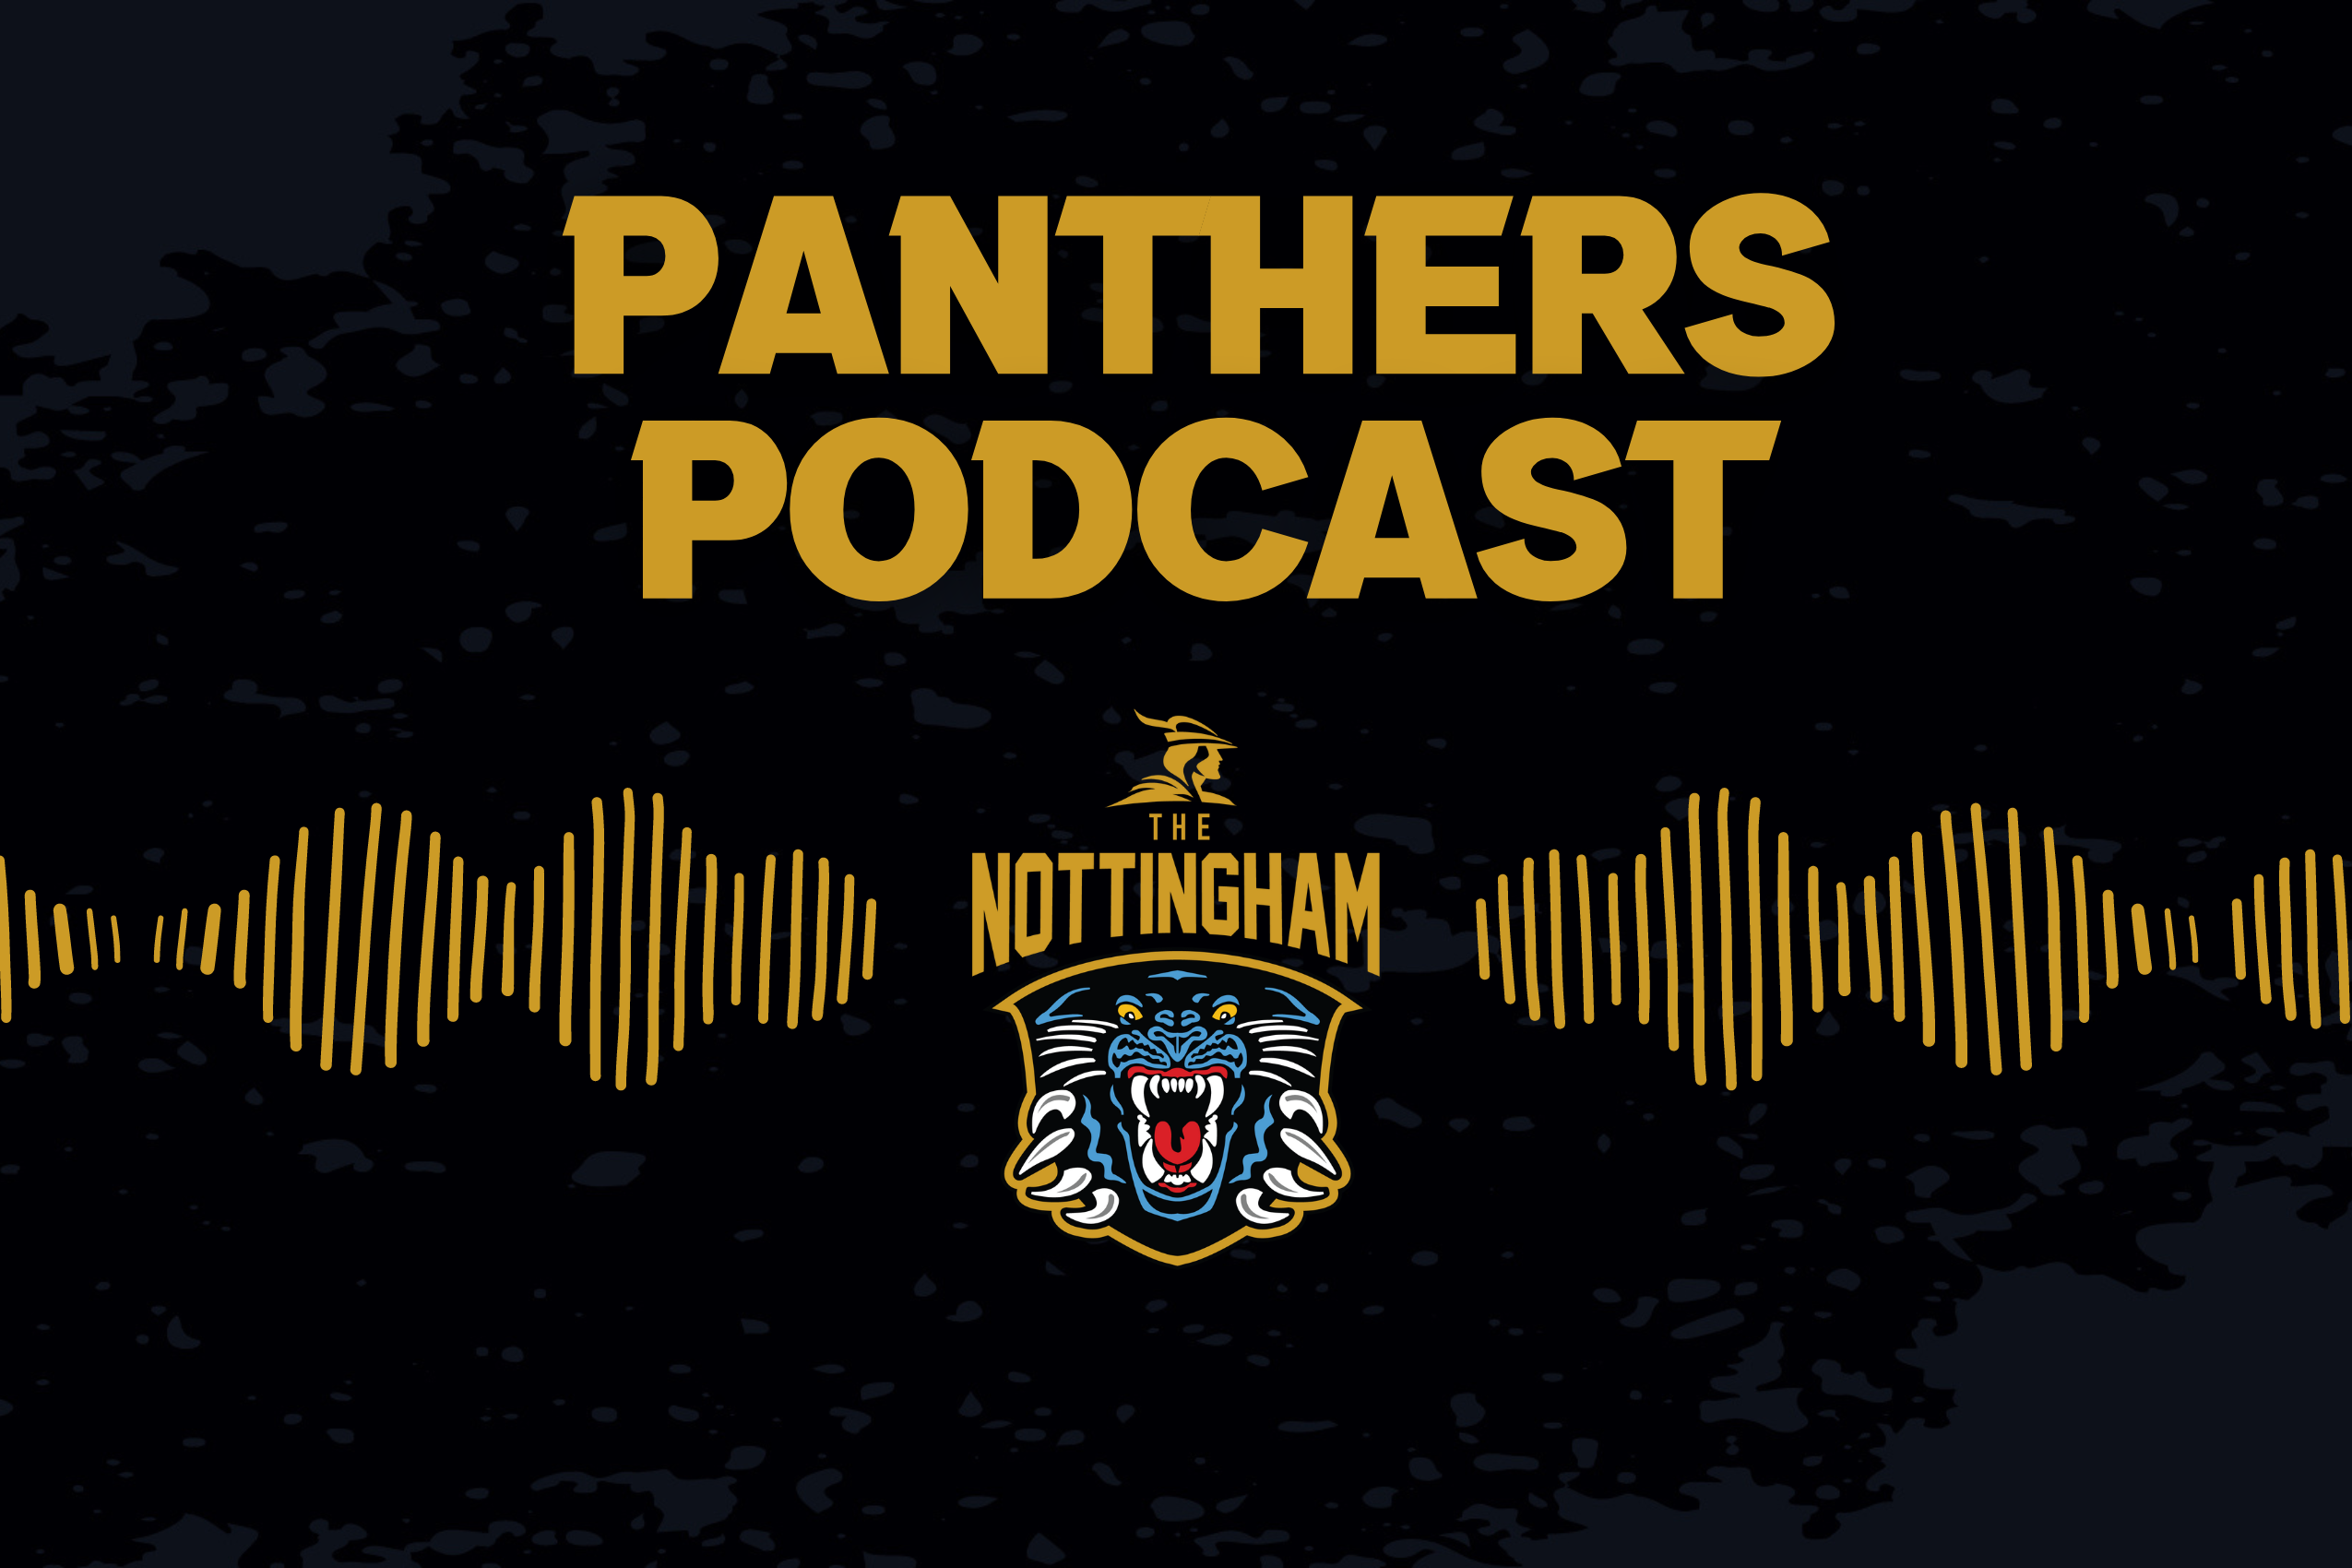 NIEMINEN AND PAREDES REFLECTIONS ON PANTHERS PODCAST Top Image